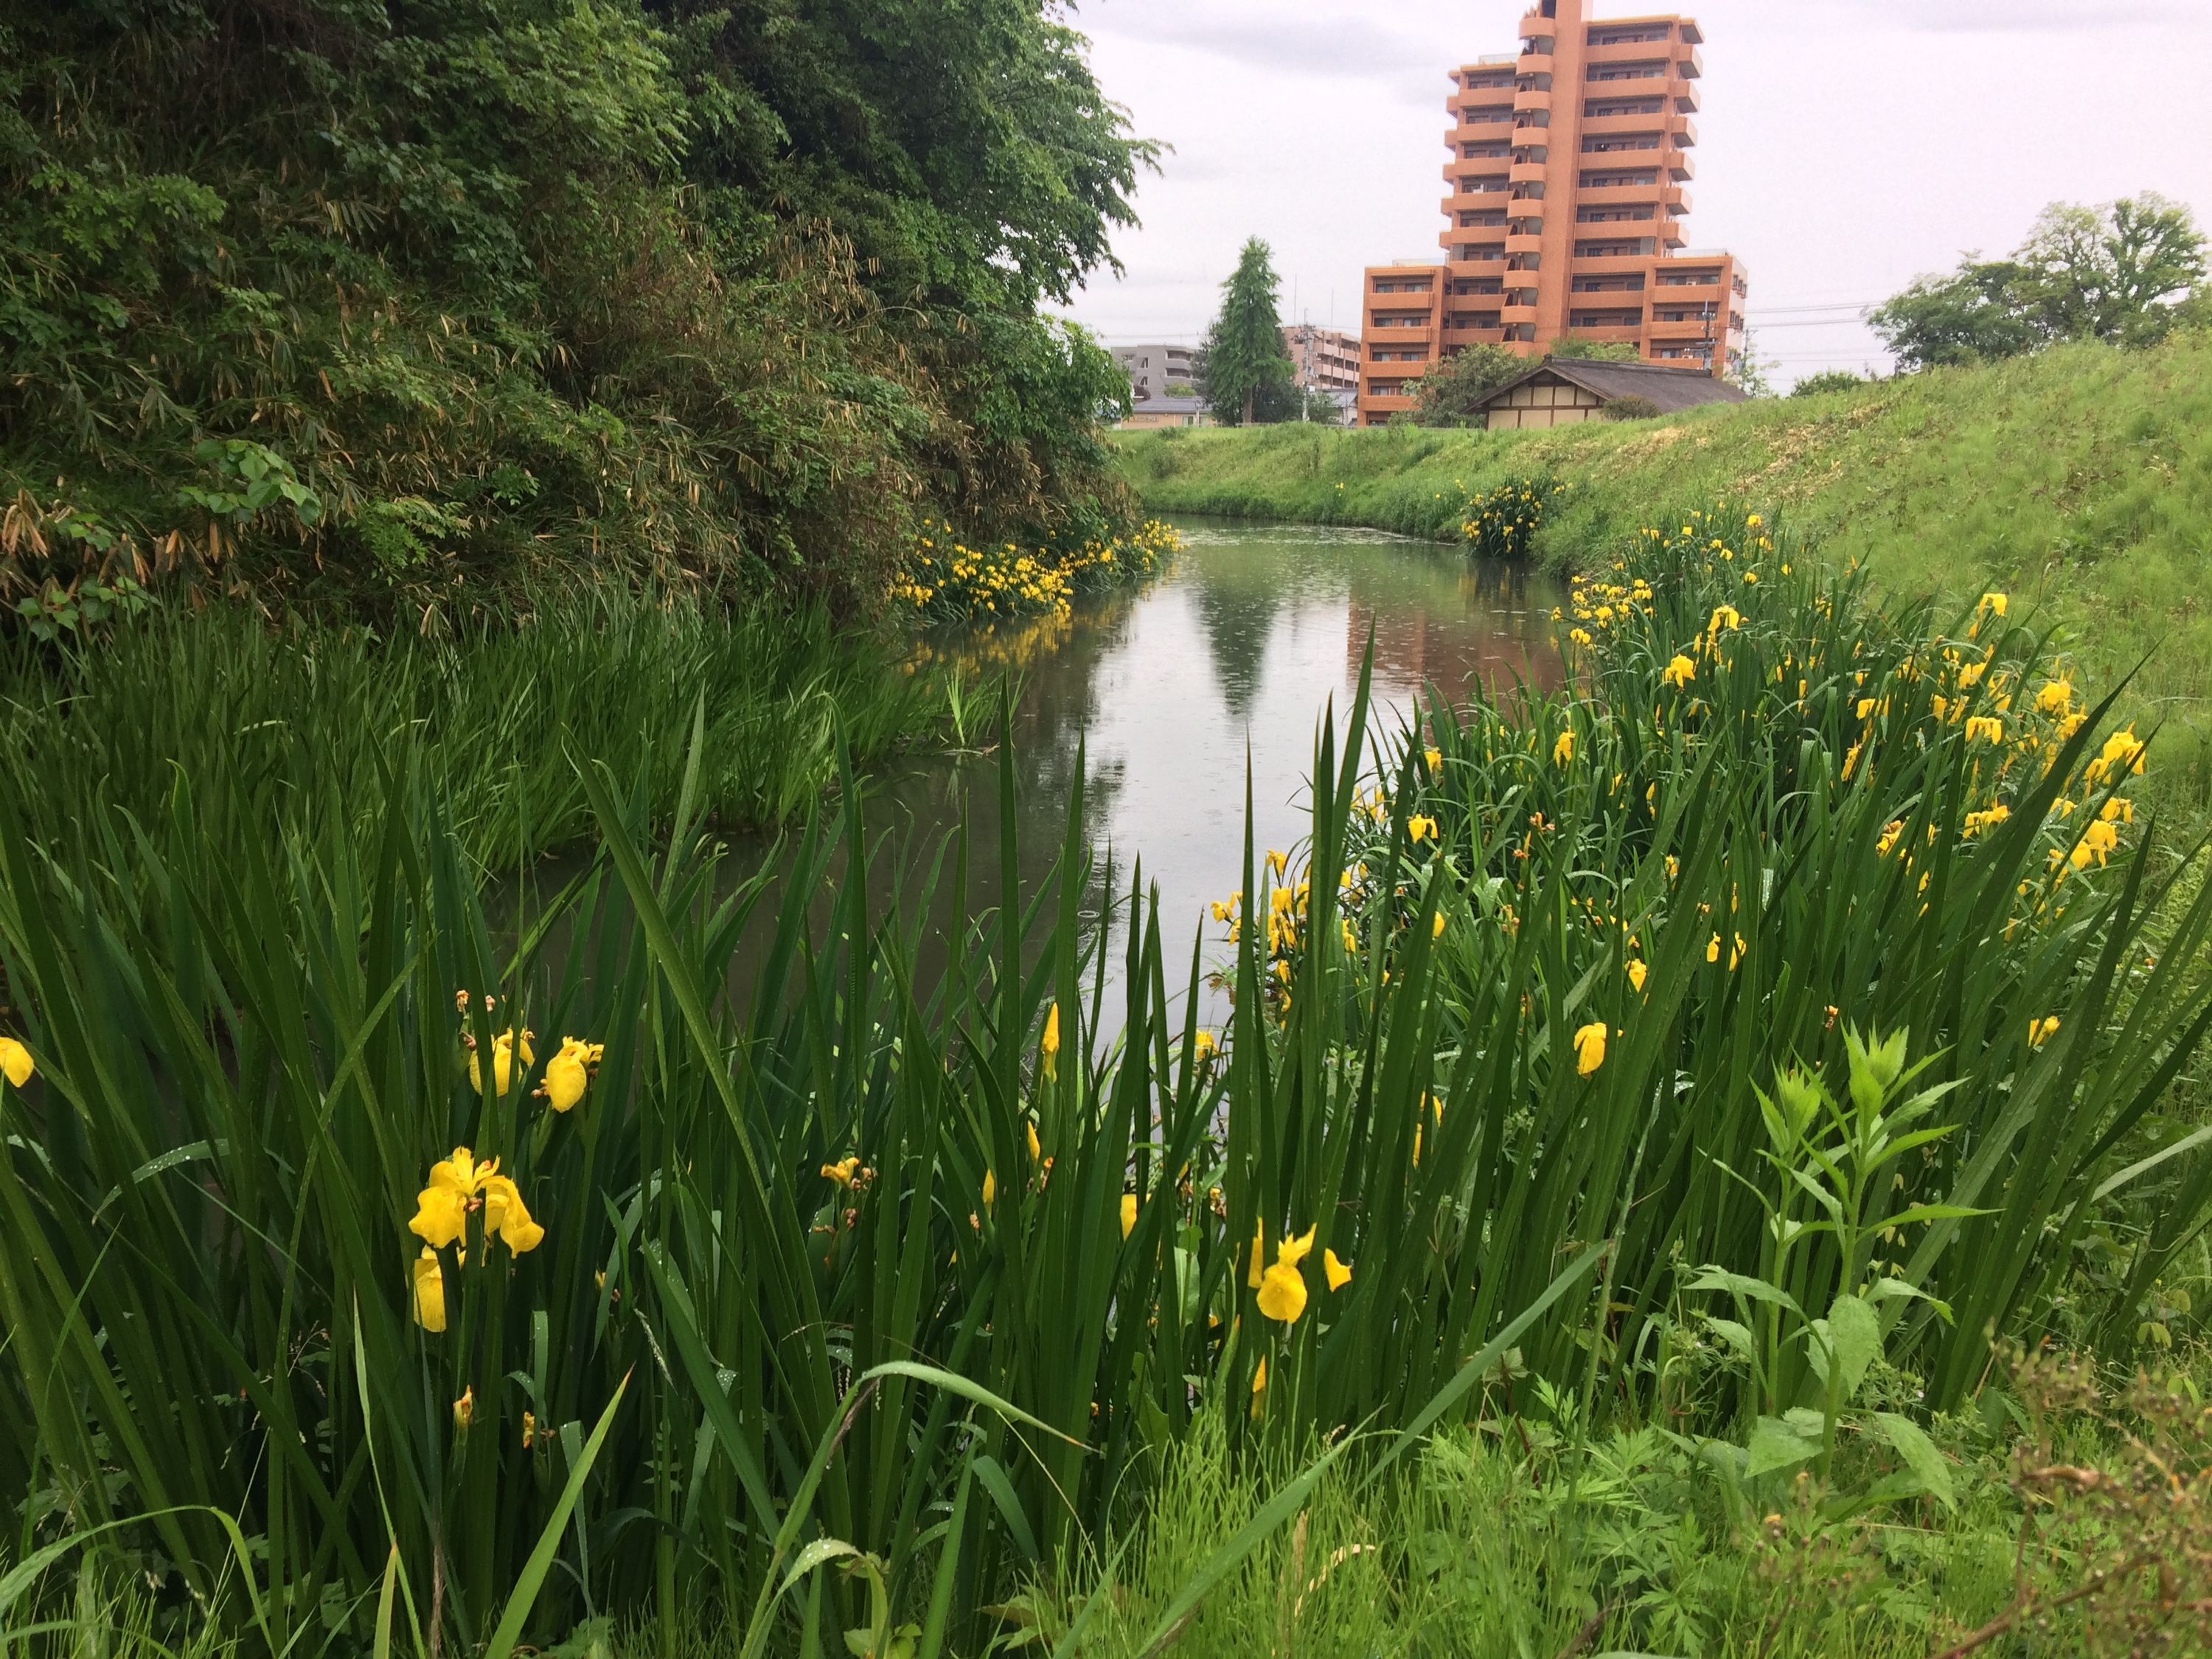 Yellow irises by a pond in a park on a rainy day, with an apartment building in the background.